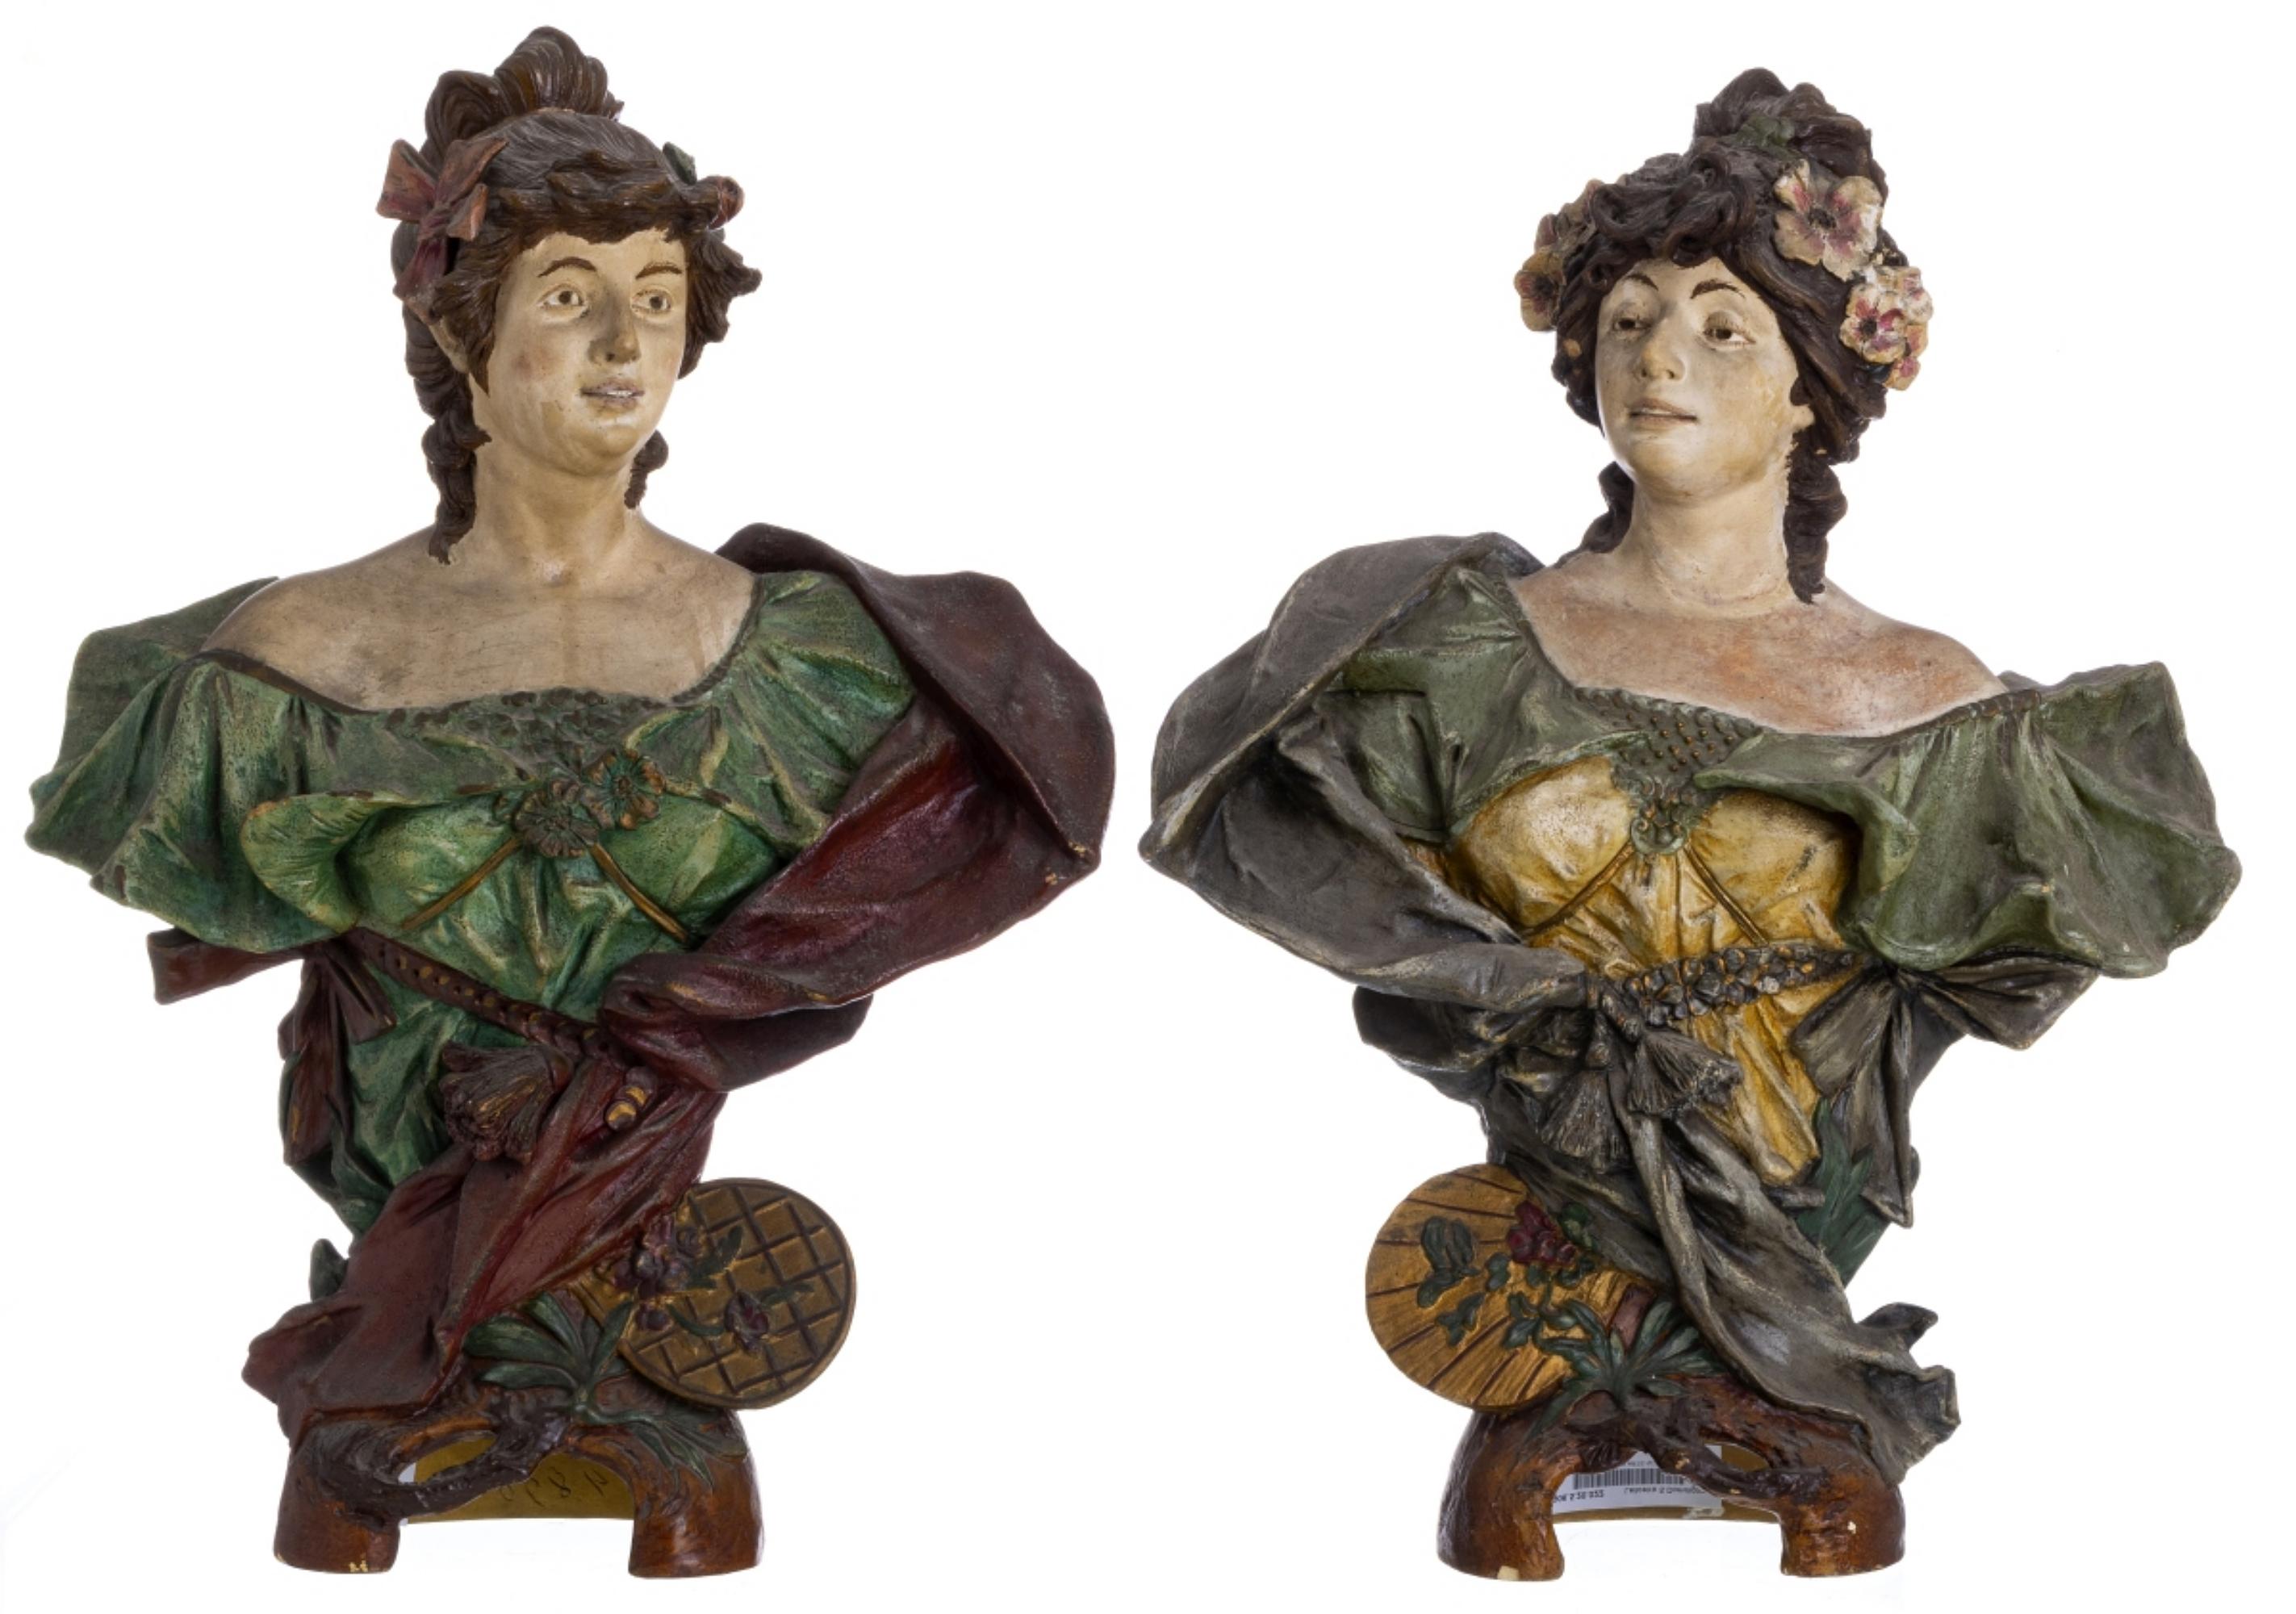 Pair of French Art Nouveau female busts 
from the beginning of the 20th century
in painted and gilded terracotta.
Small flaws one features collage.
Height: 48 cm.
Good conditions.